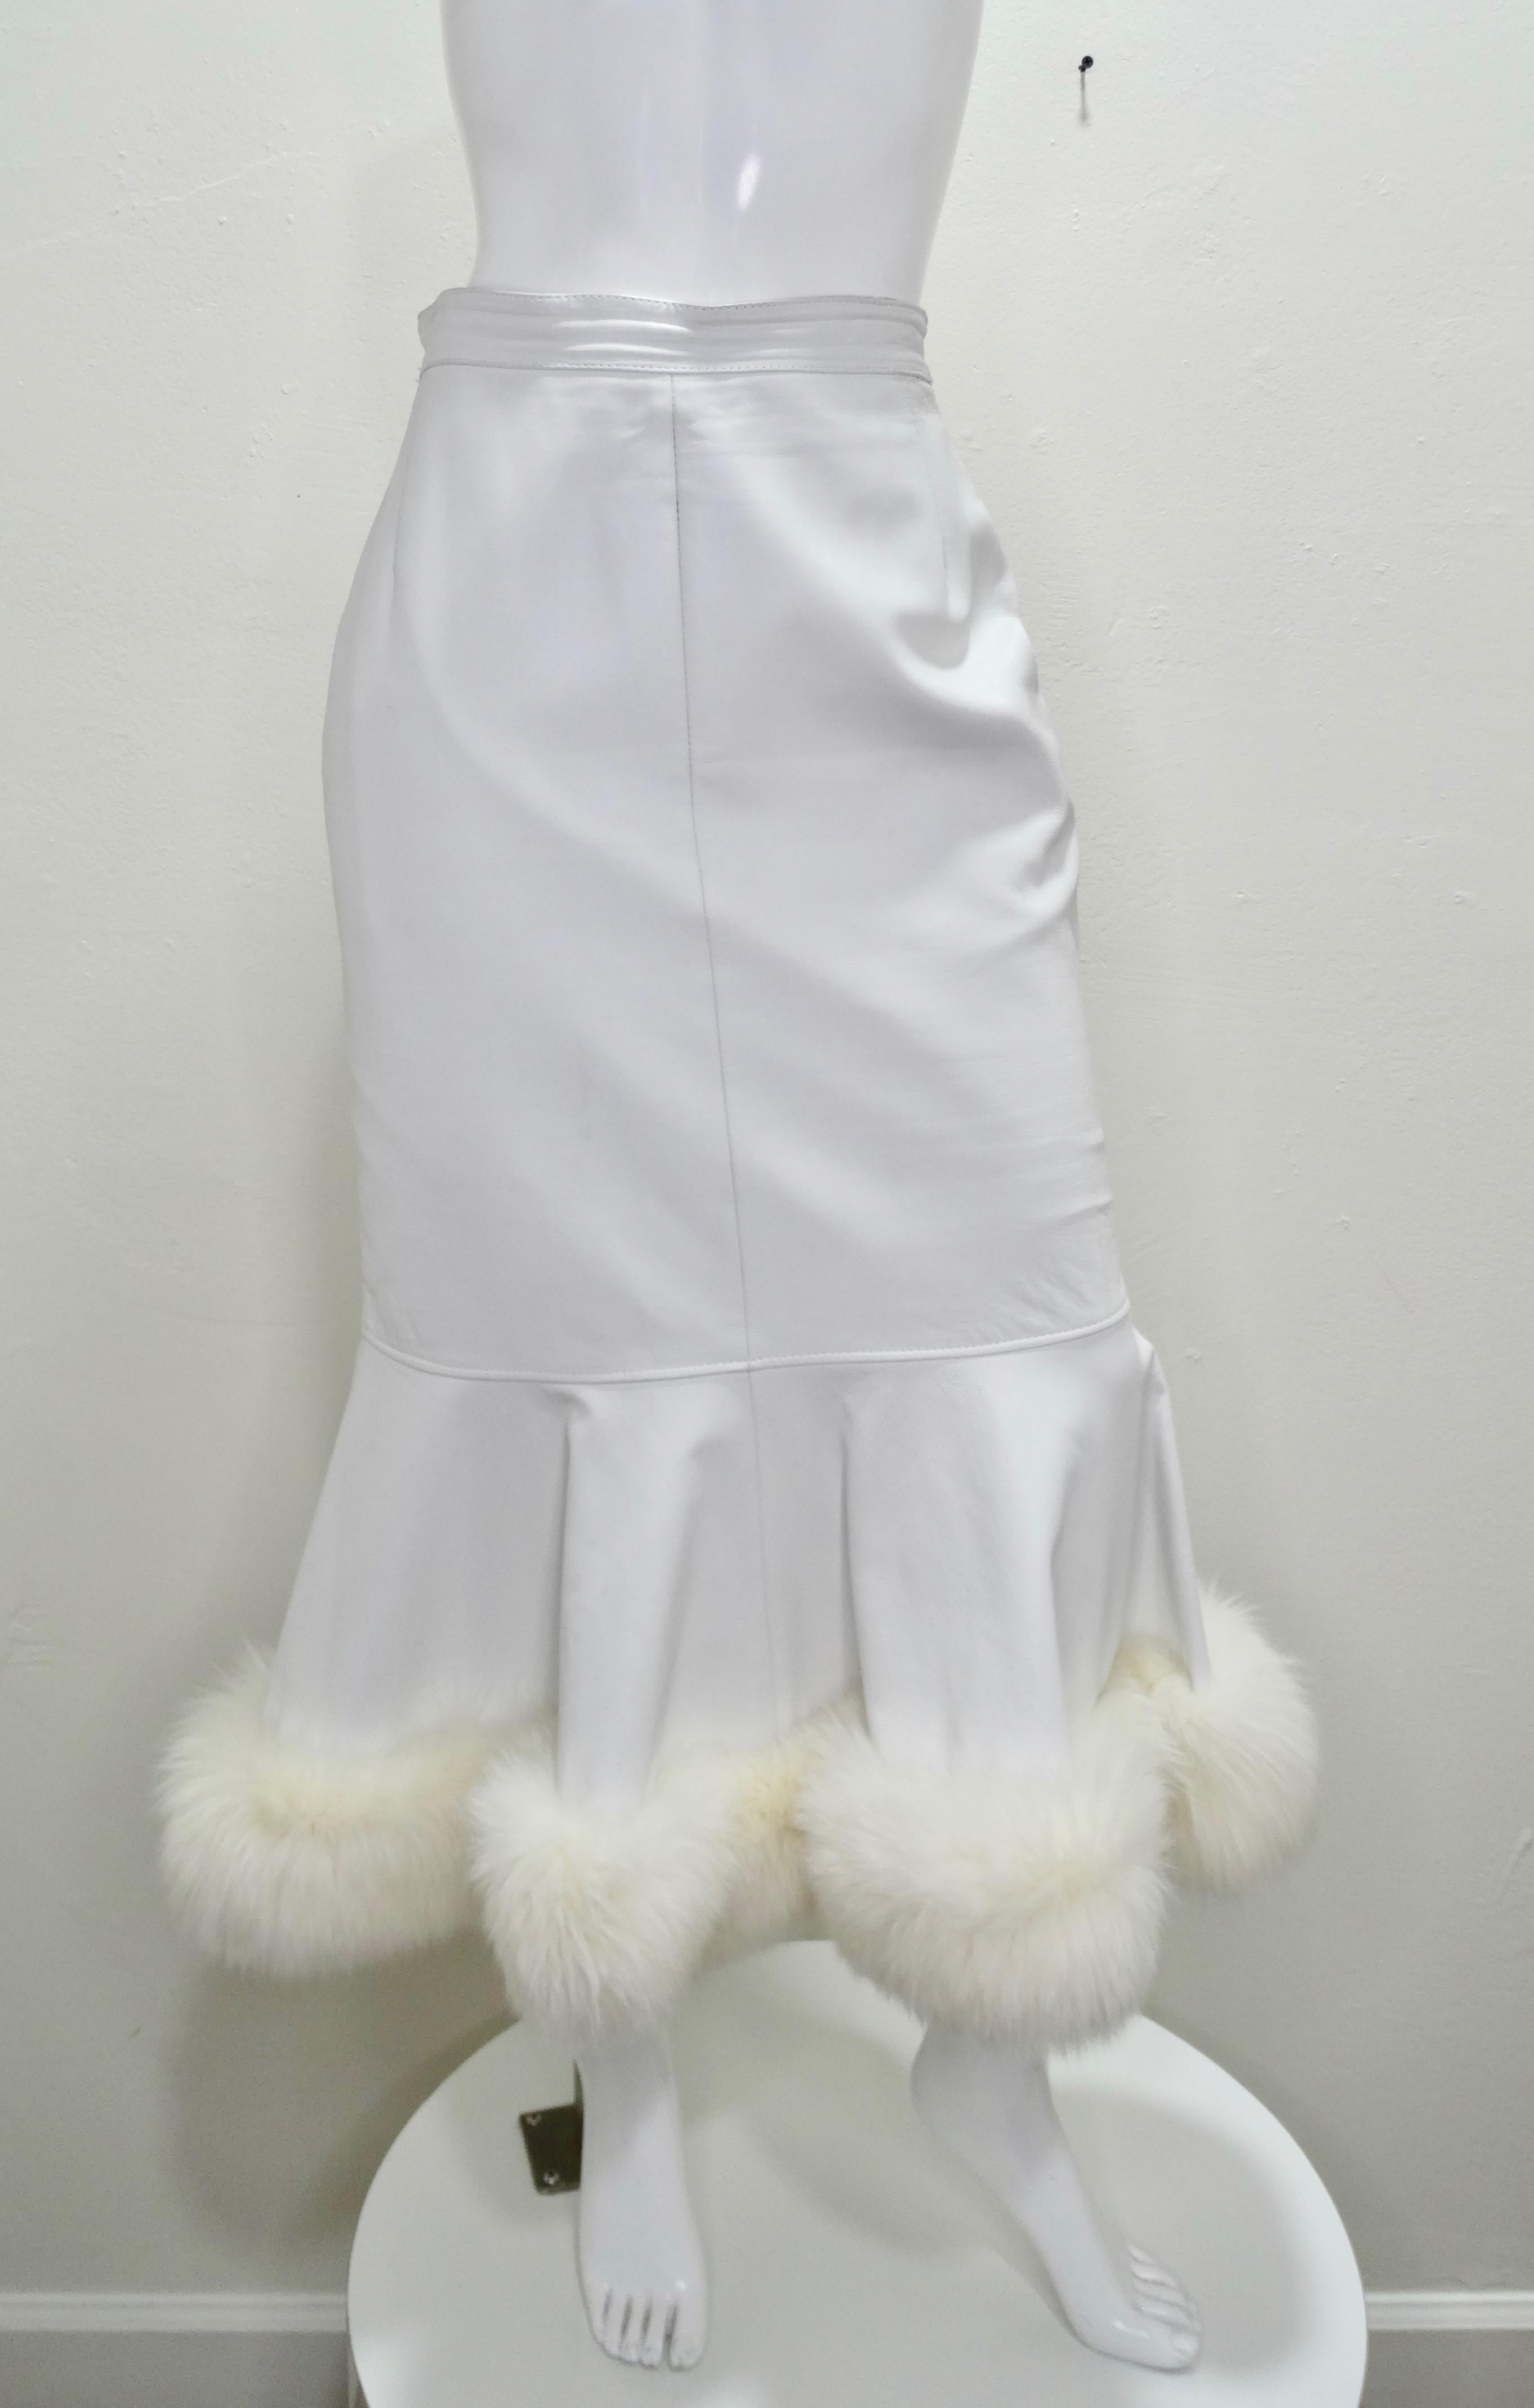 Feel All Of The 80s Vibes In This Leather Skirt! Circa 1980s, this custom couture numbered 10829 Jean Claude Jitrois skirt is crafted from white leather and features a peplum bottom with a fox fur trim and zipper/snap button closure on the back.